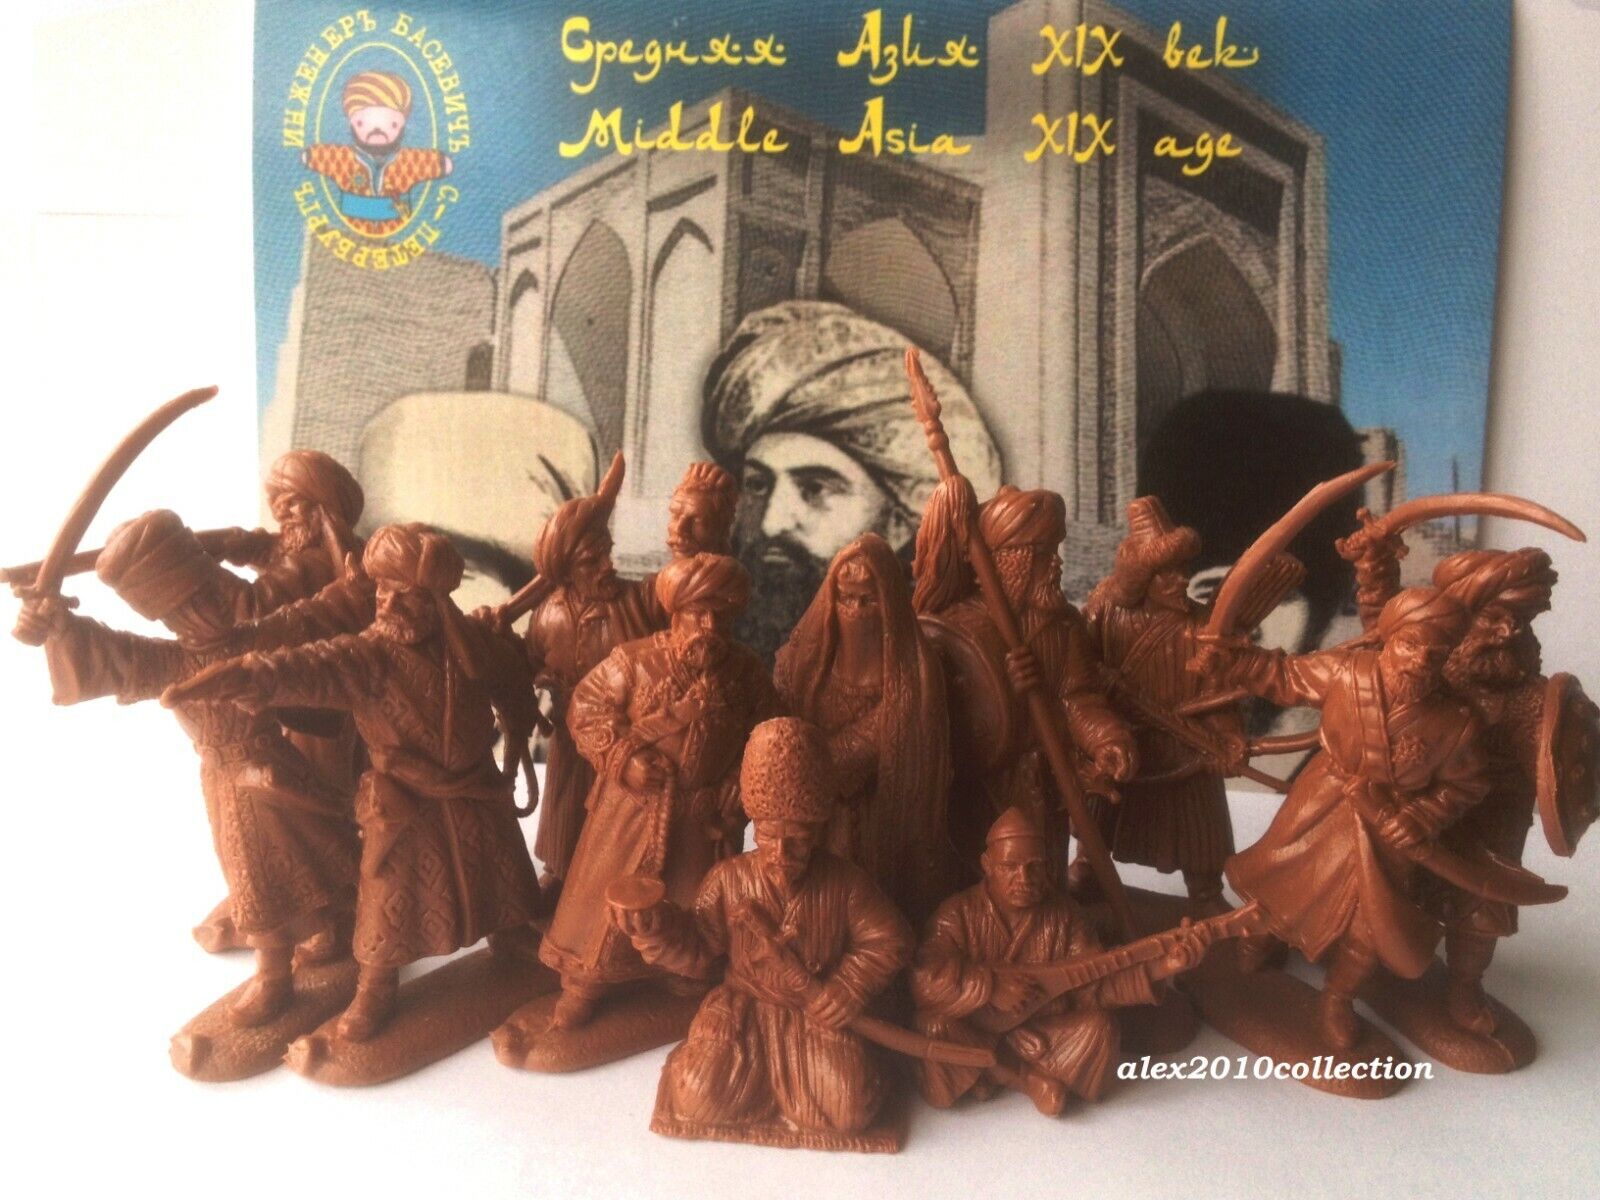 Engineer Basevich,  Central Asia 19th, 1/32 scale unpainted, collectible 12 Central Asia figures